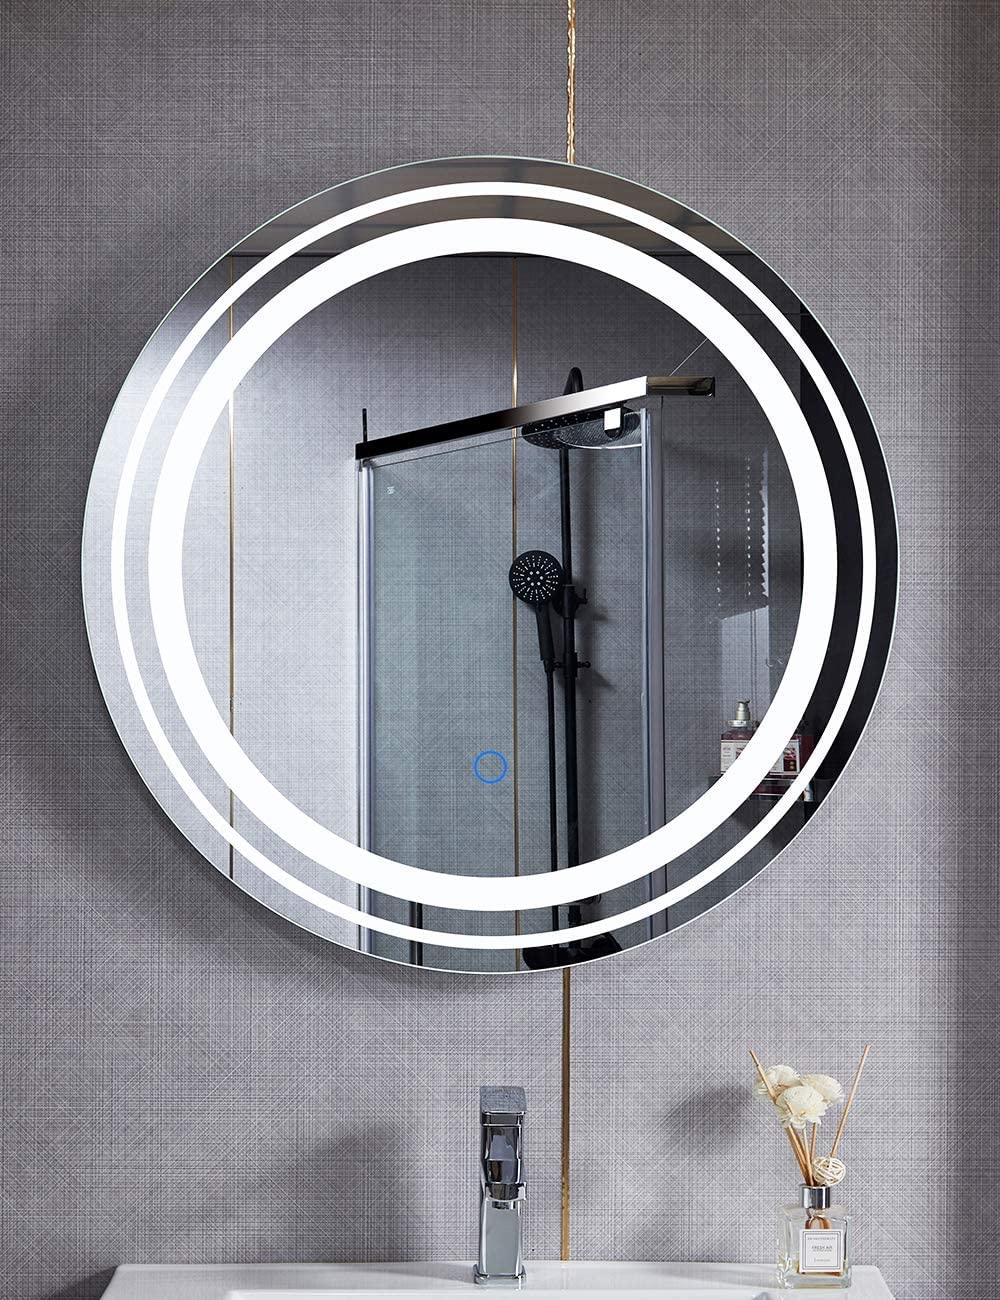 SmileSellers LED Bathroom Vanity Mirror| Wall Mounted Circle Mirror| Adjustable Color Temperature,Dimmable Memory Function